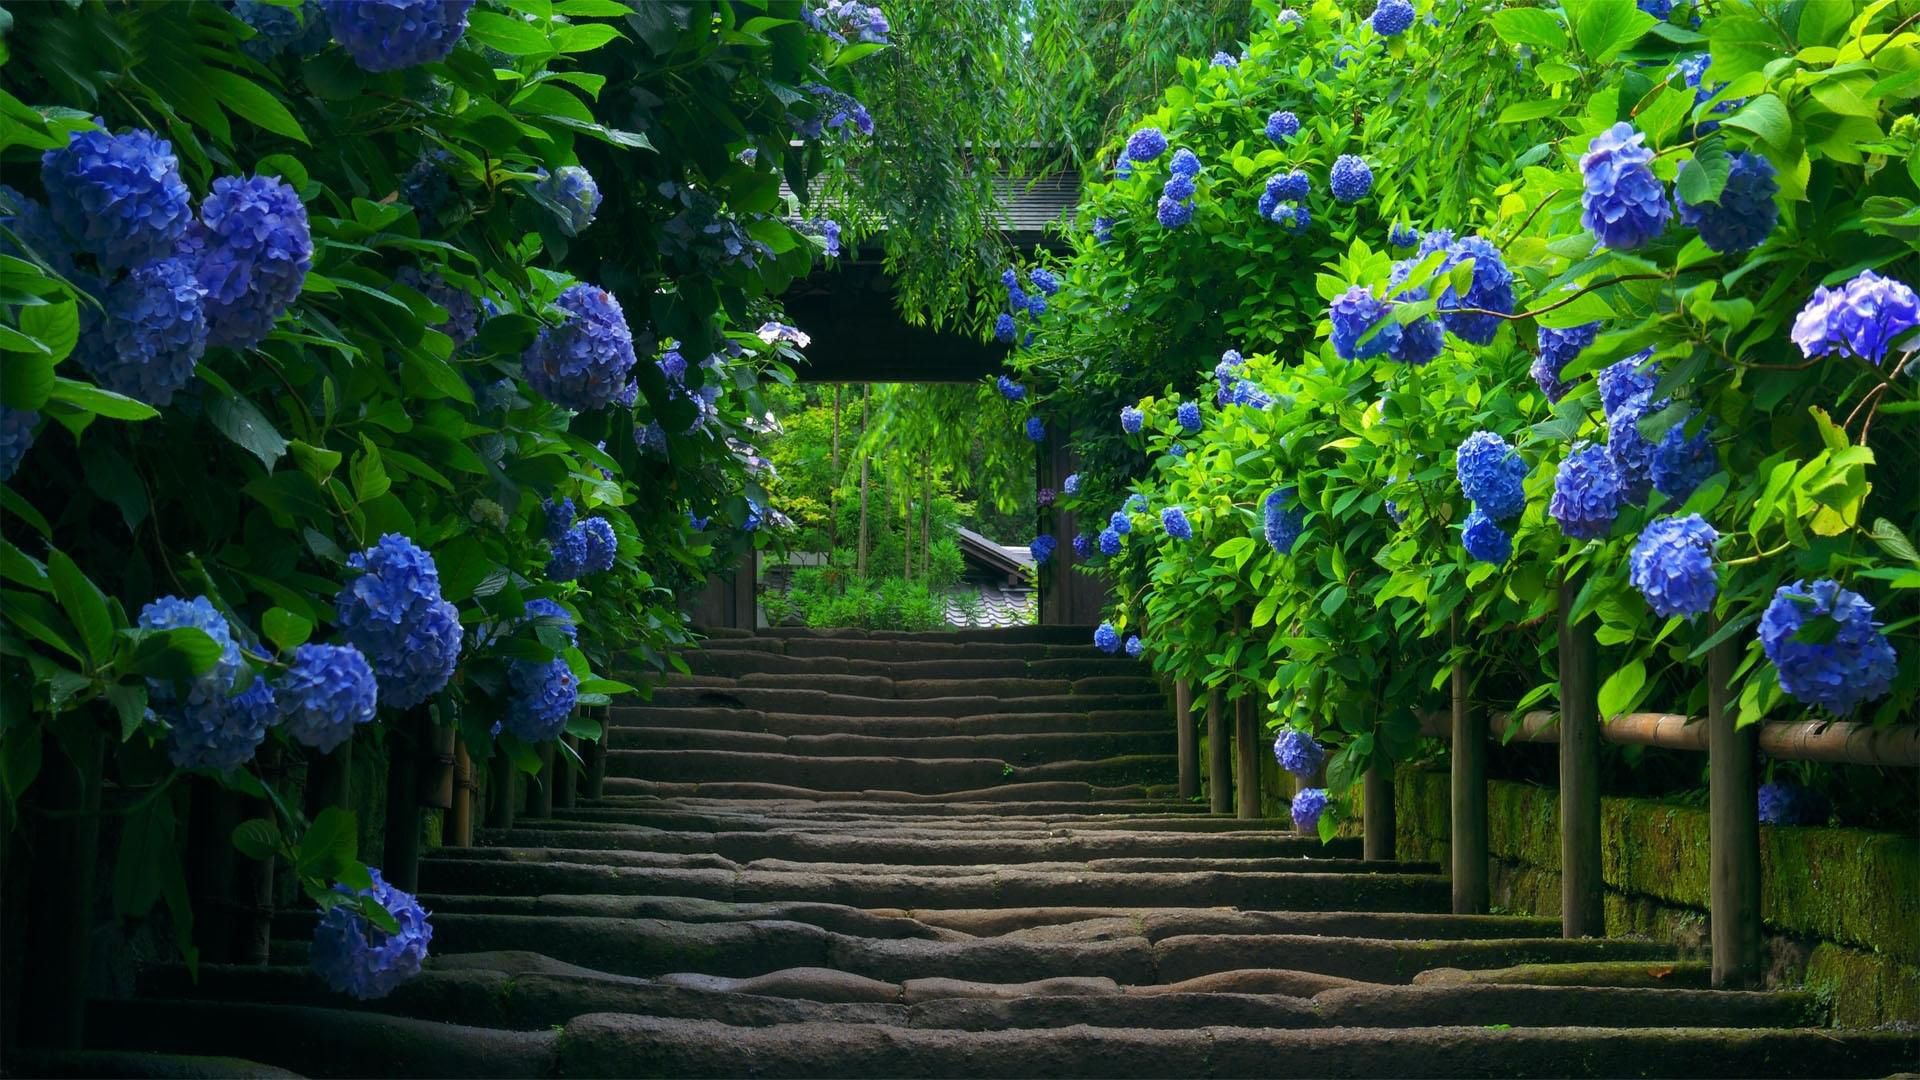 Attractive garden hd wallpapers | Latest HD Wallpapers